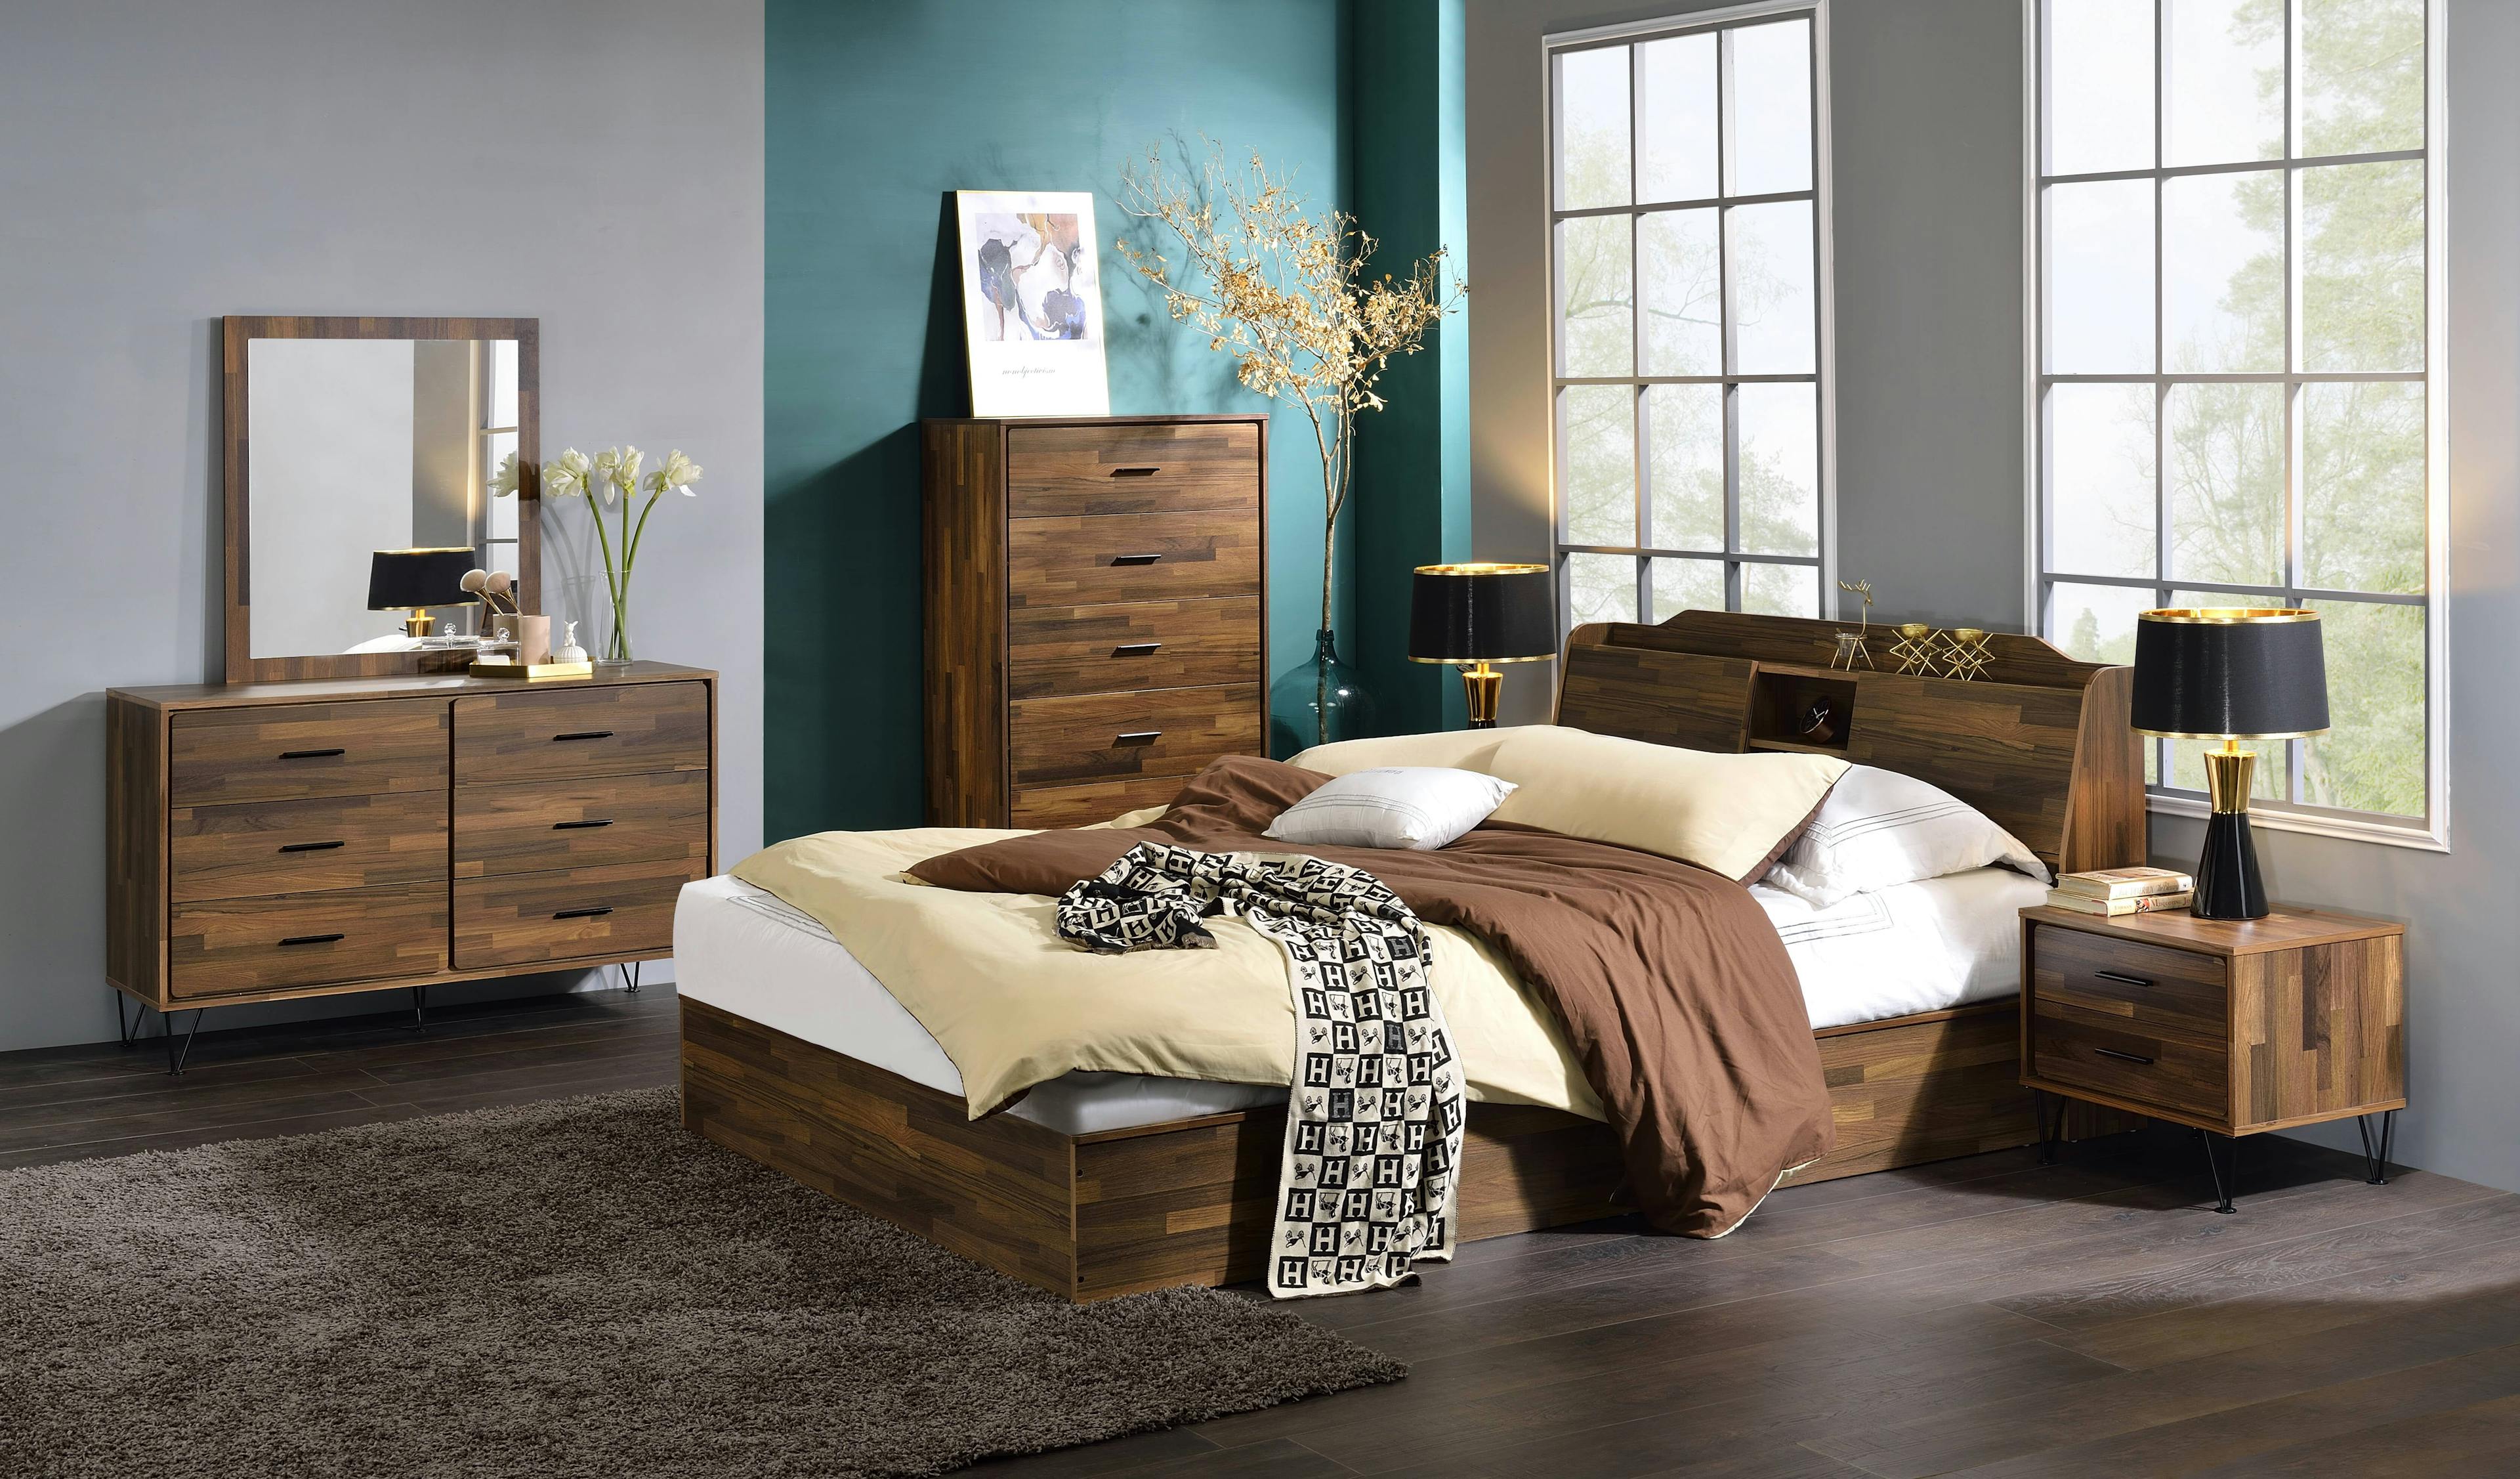 Hestia Midcentury Queen Bed with Upholstered Leather Headboard and Storage